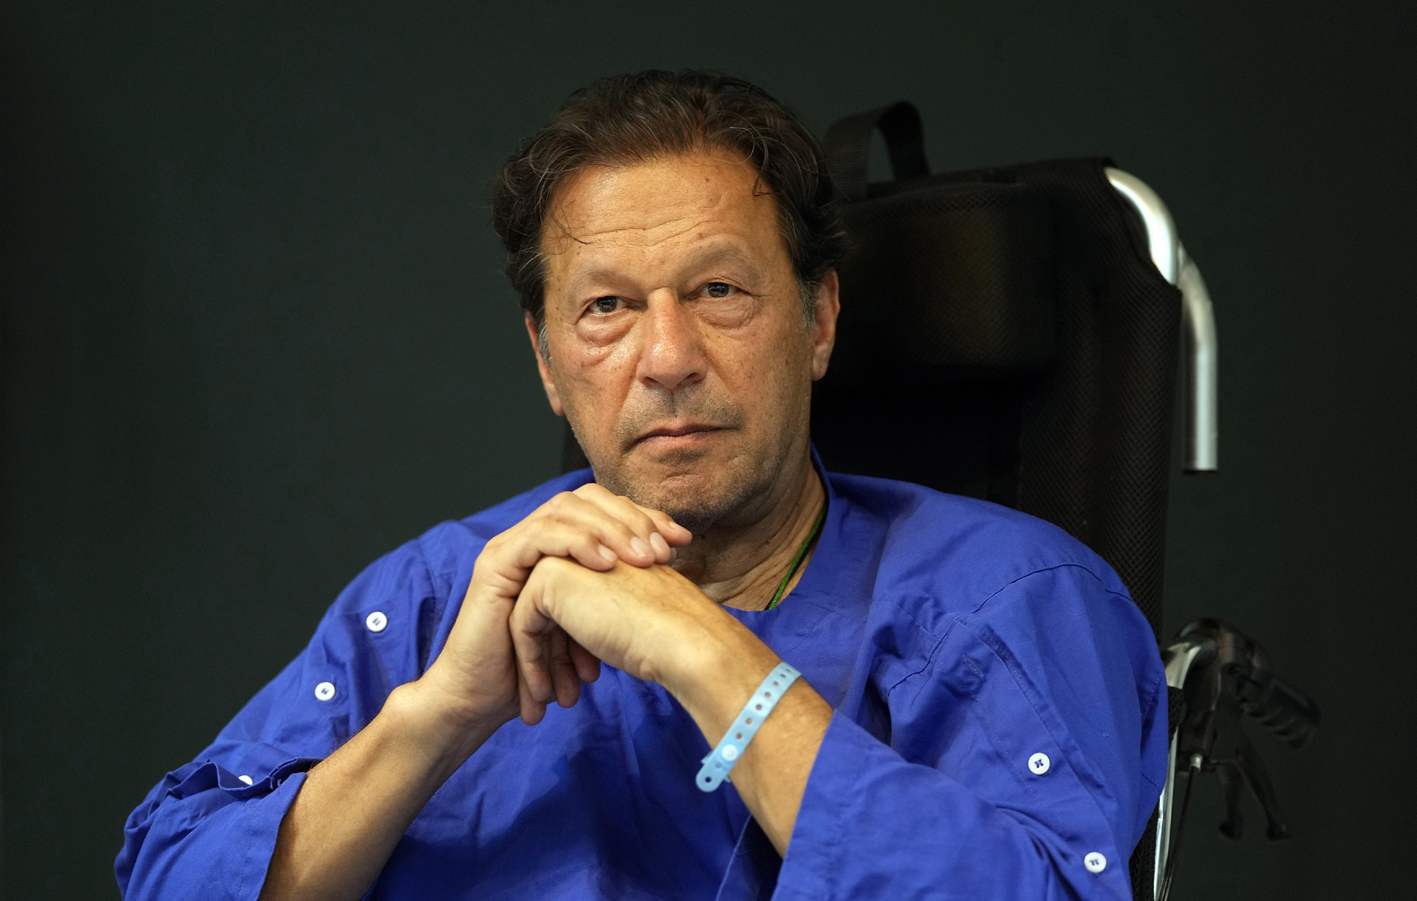 Jailed former Pakistani PM Imran Khan's political advisor kidnapped in Lahore: report